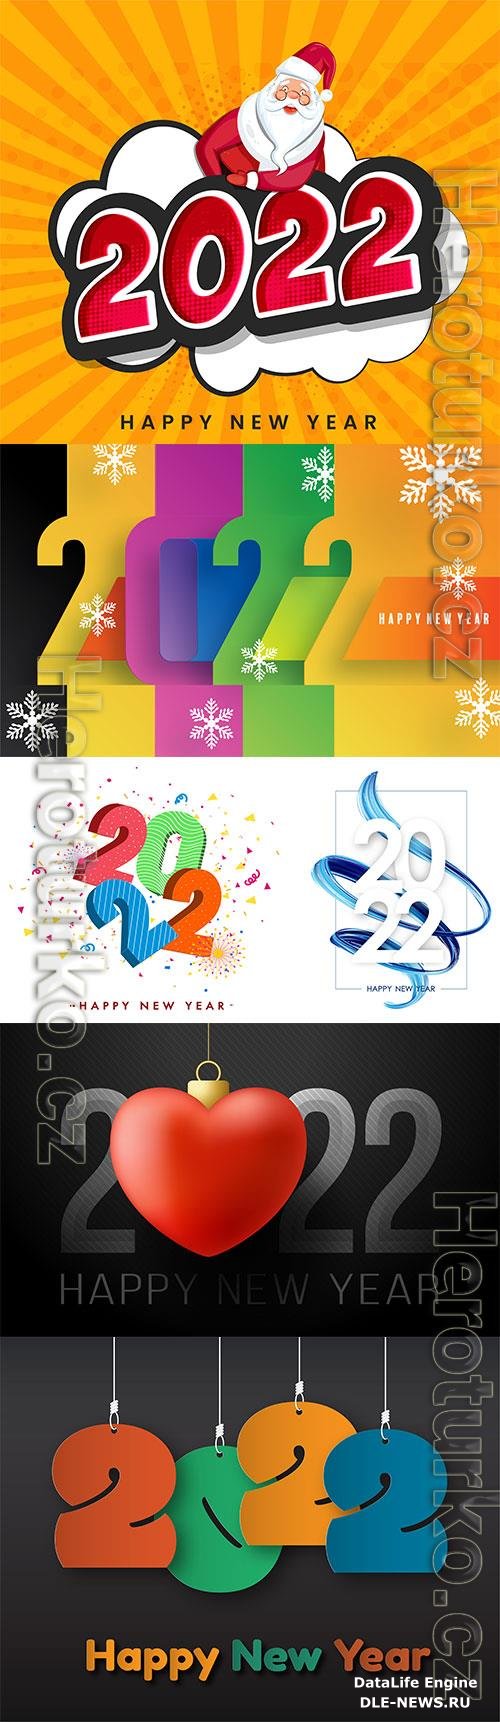 Realistic happy new year 2022 background with texture numbers